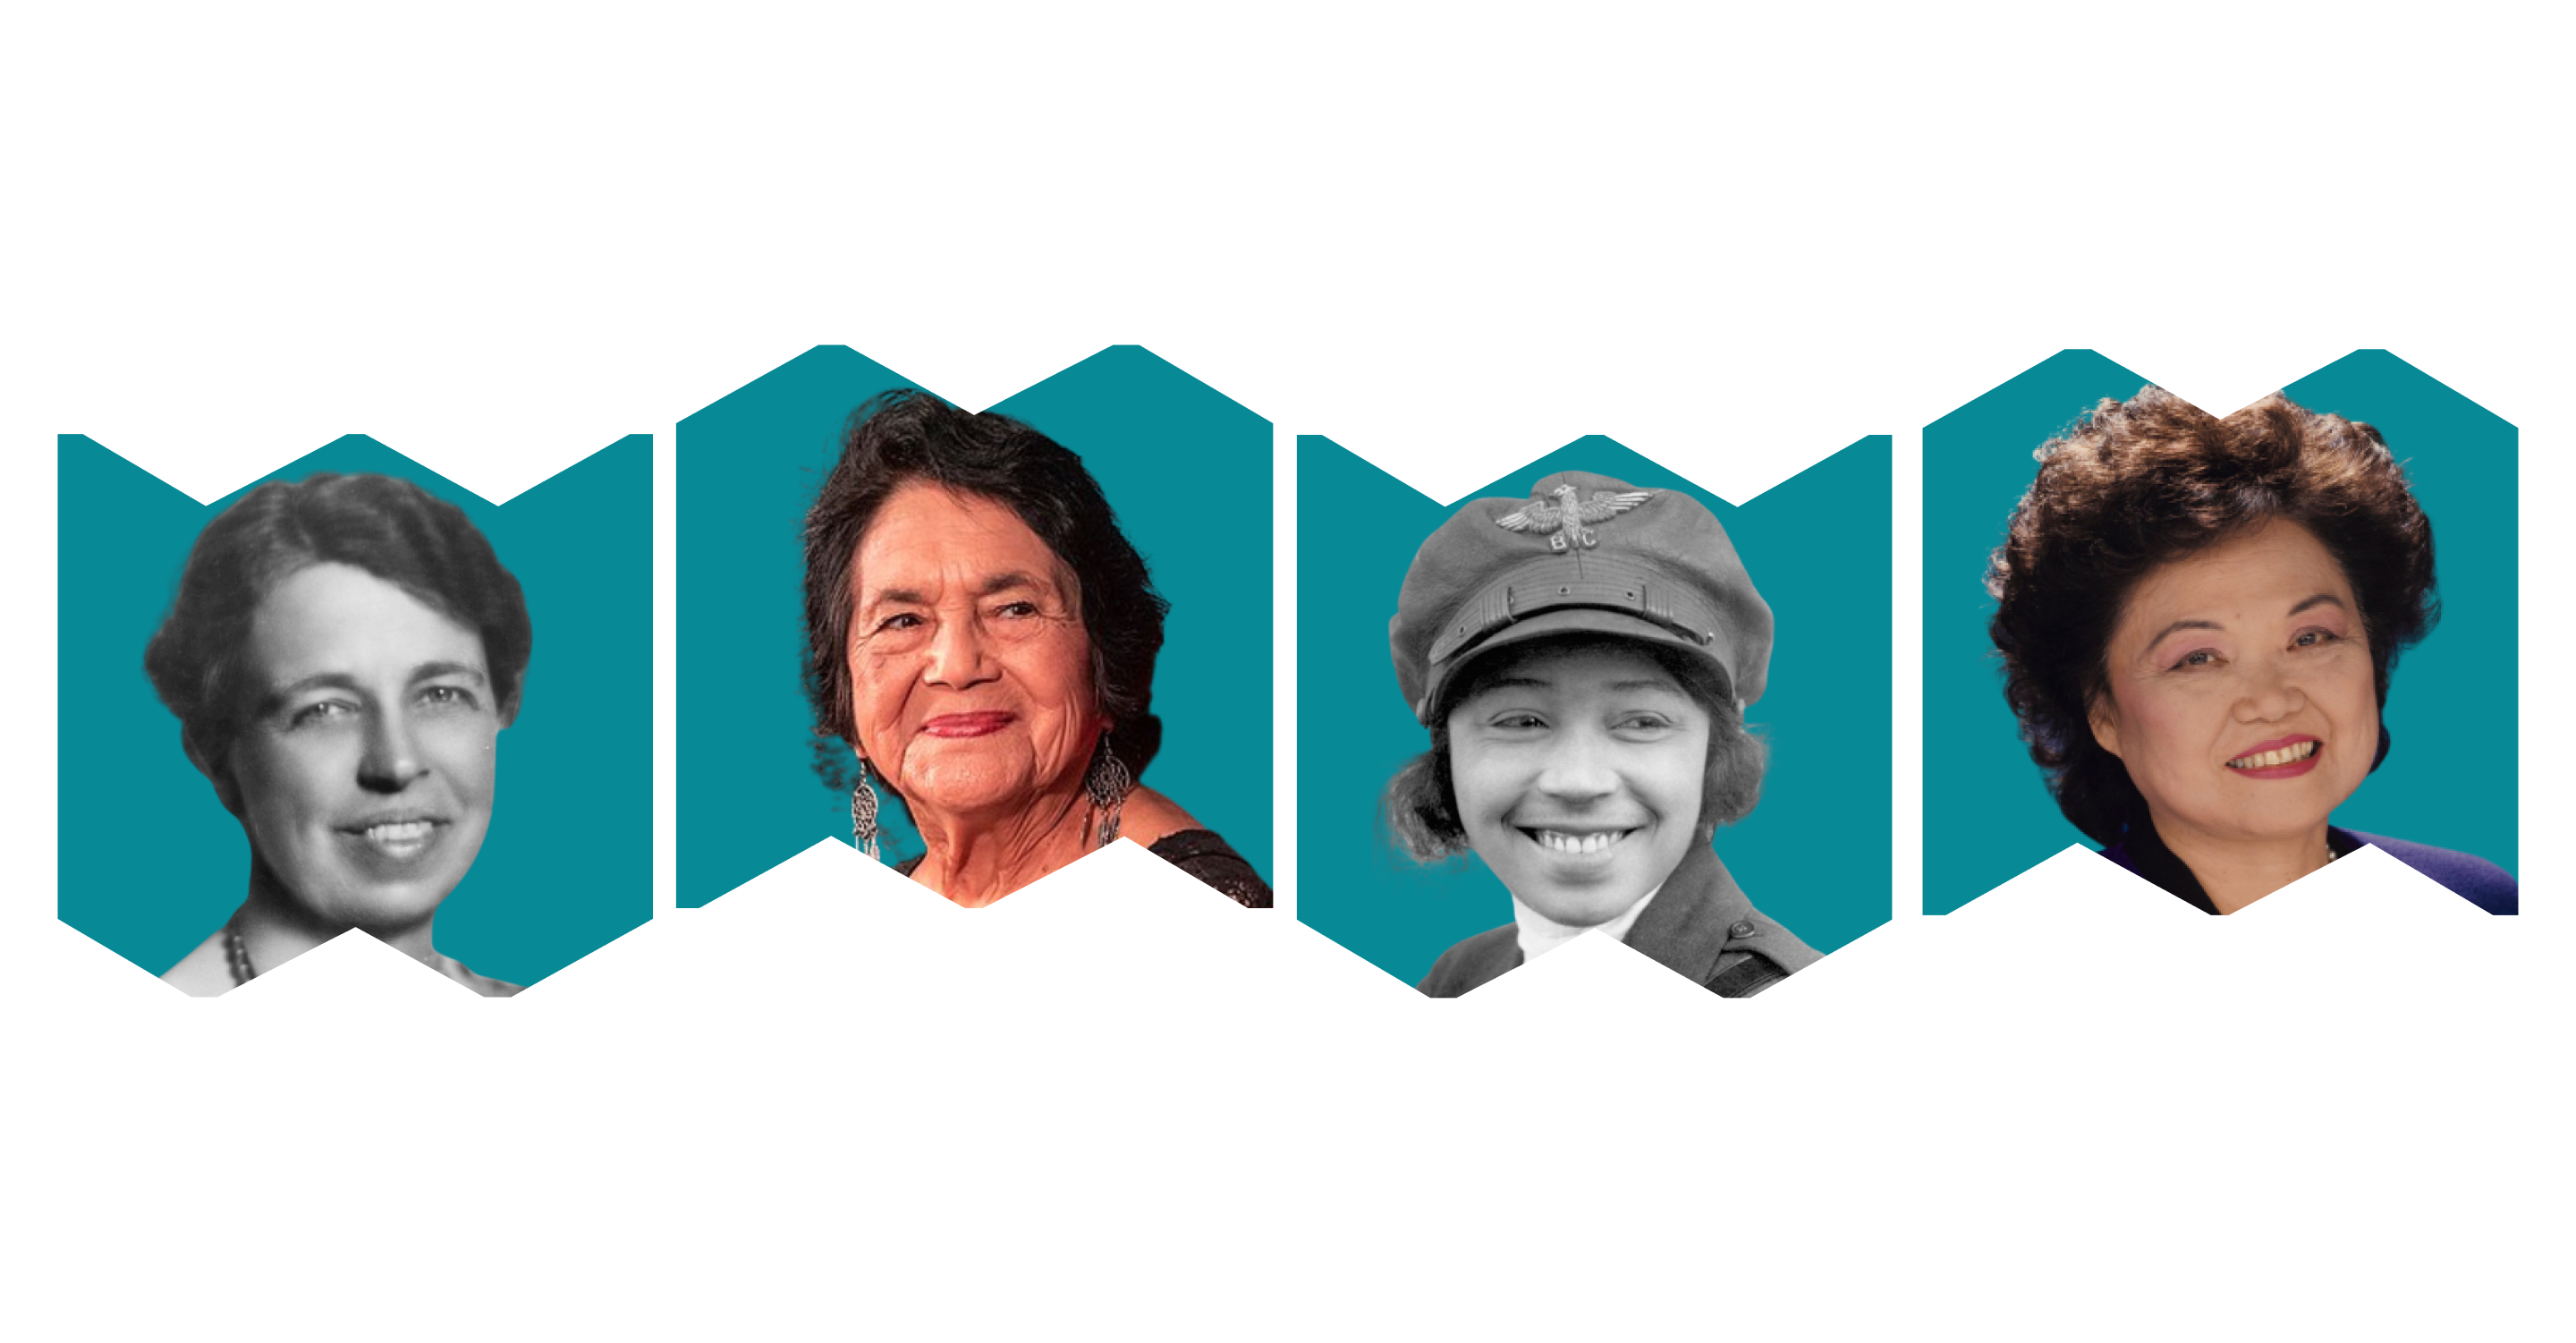 From left, in alternating "W" and "M" frames: Headshots of Eleanor Roosevelt, Dolores Huerta, Bessie Coleman, and Patsy Mink.